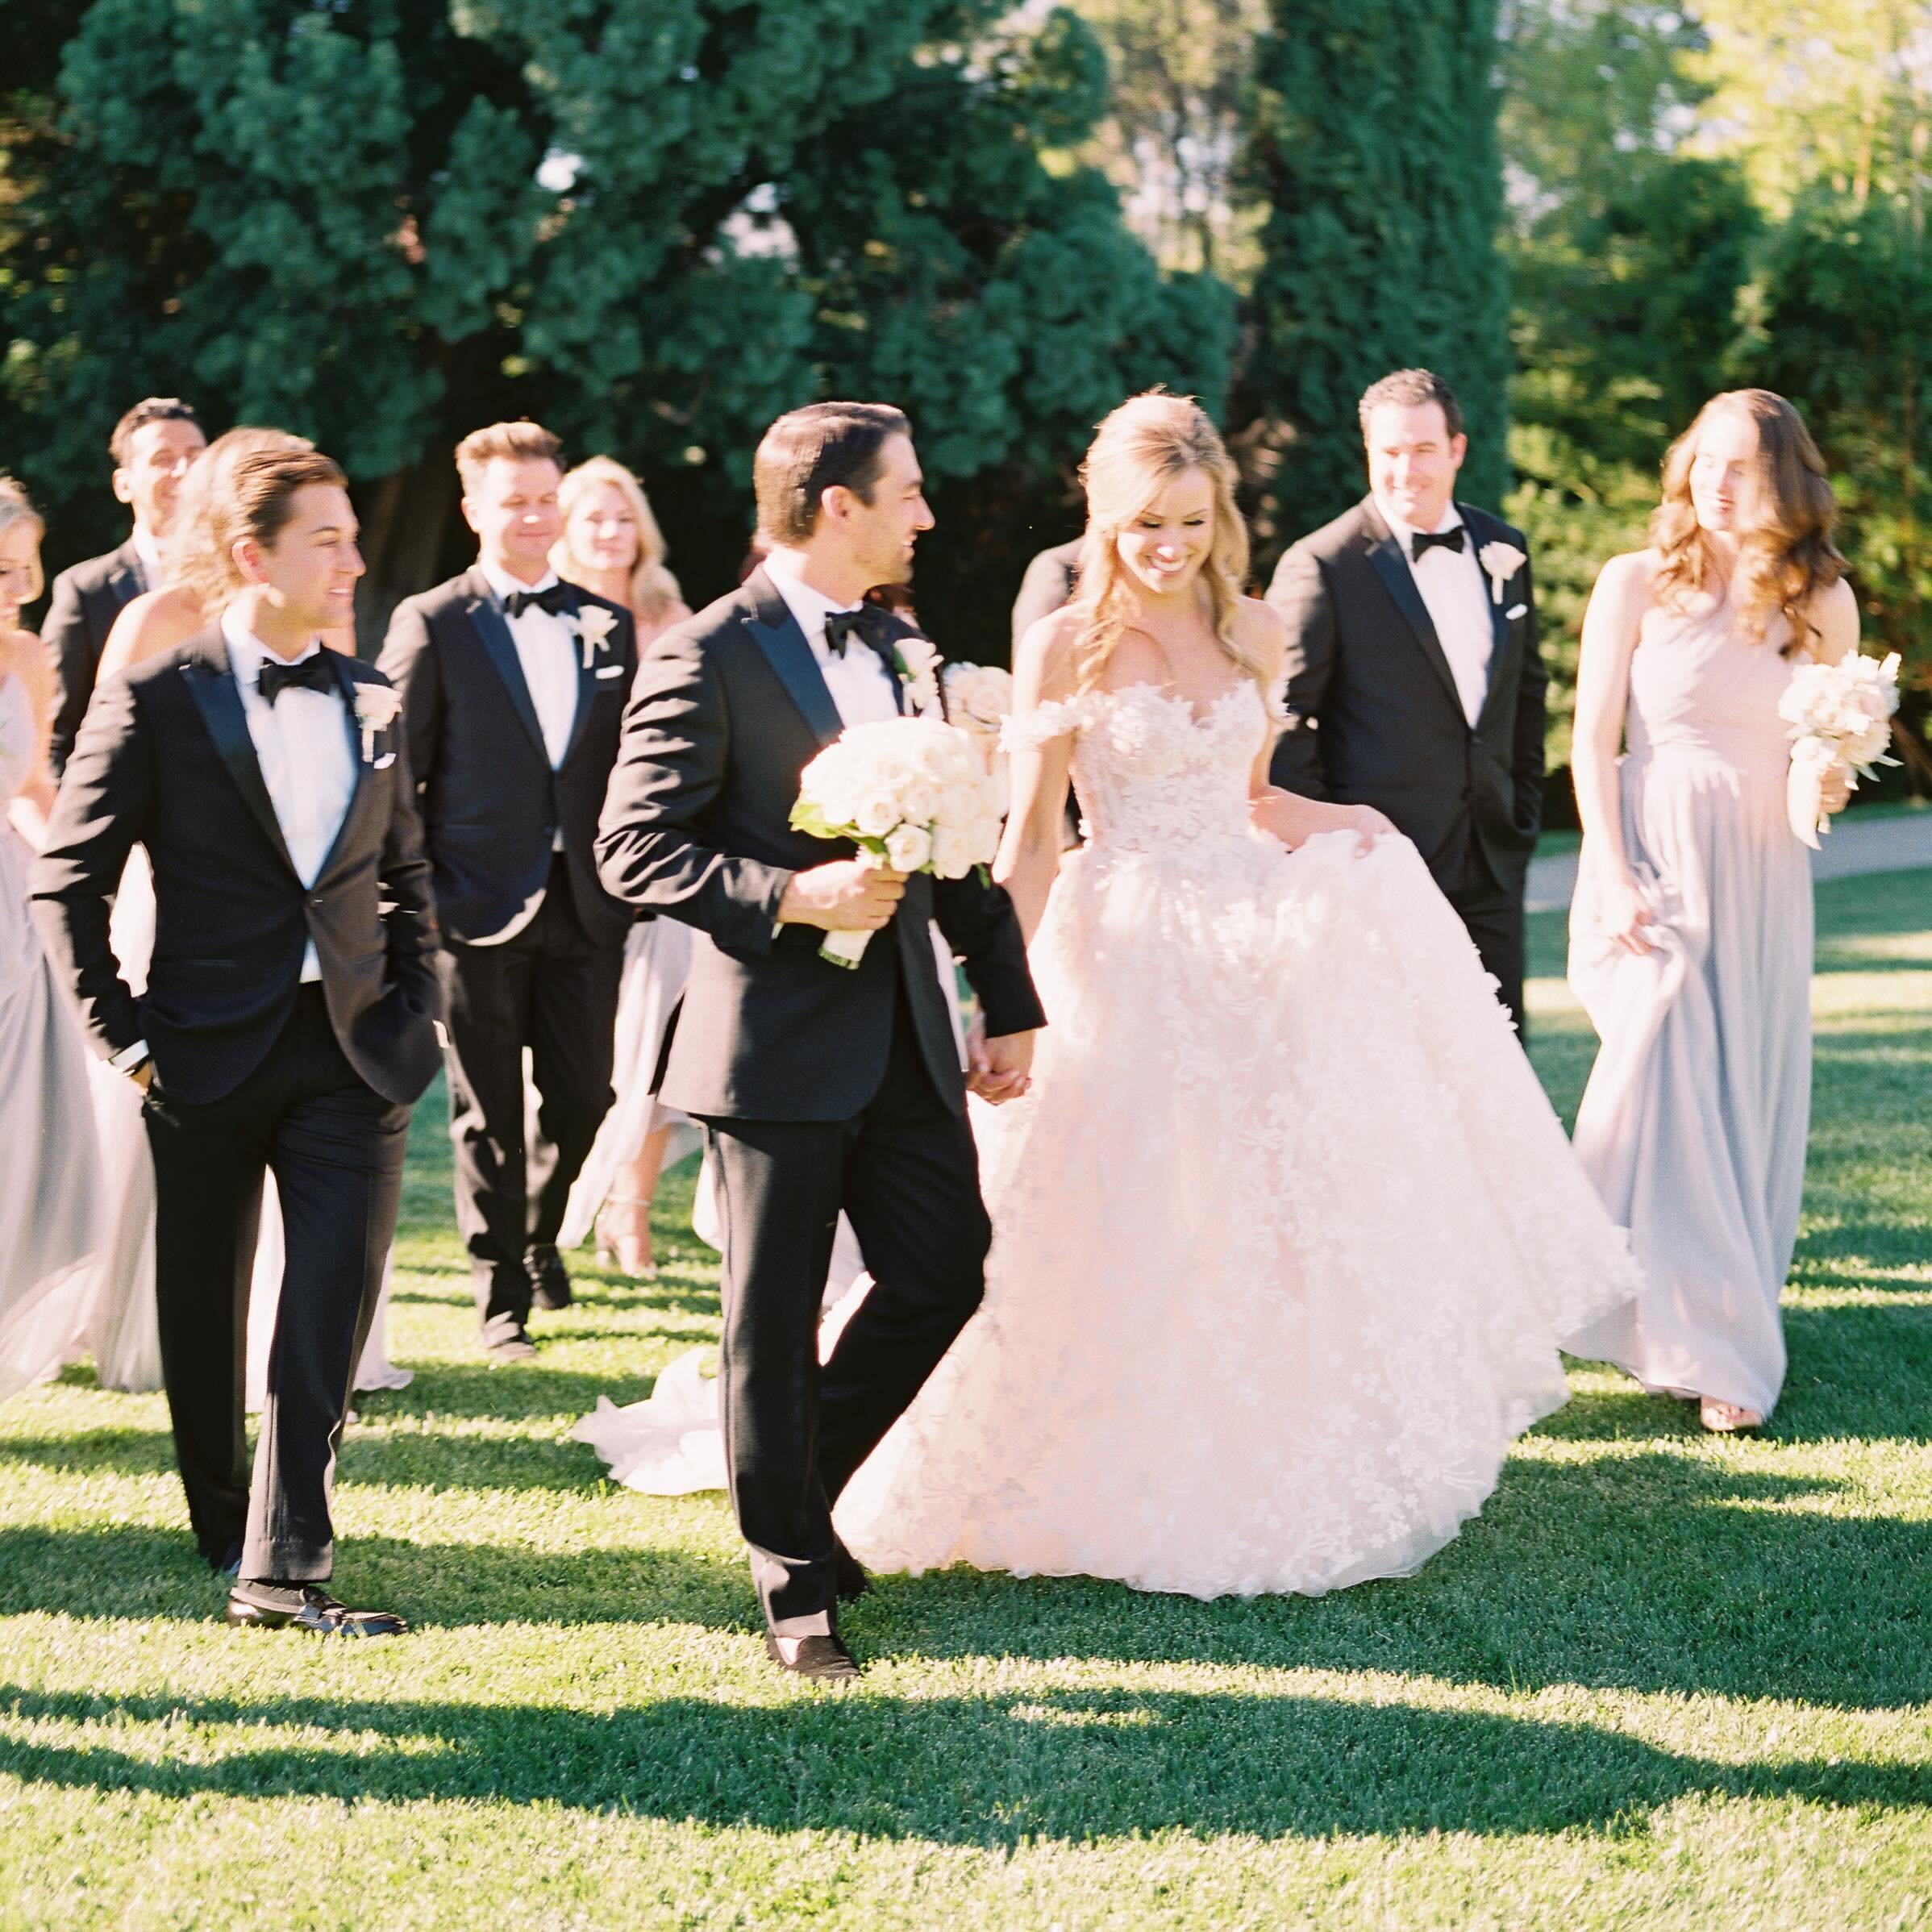 Imagine this! Is your Wedding Day, and you have All Your Besties by your side. The high school friend, the college friend, the co-worker. All there, cheering you own, as you walk down the aisle! 

Planner: @sayidotdetails
Photography: @amygoldingphot